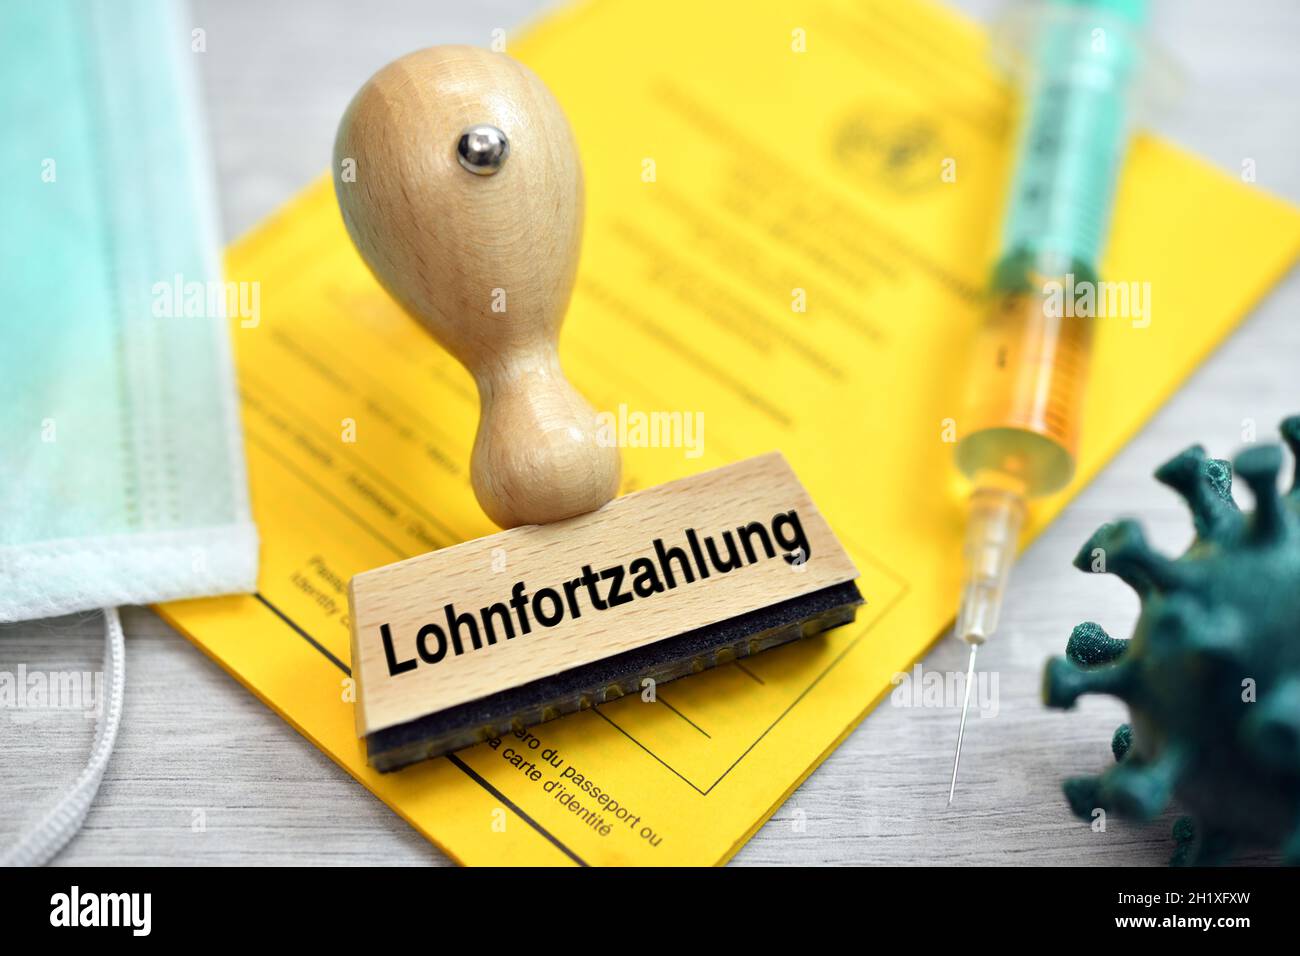 German Word For Continued Payment Of Wages On Stamp Lying On A Vaccination Card Stock Photo